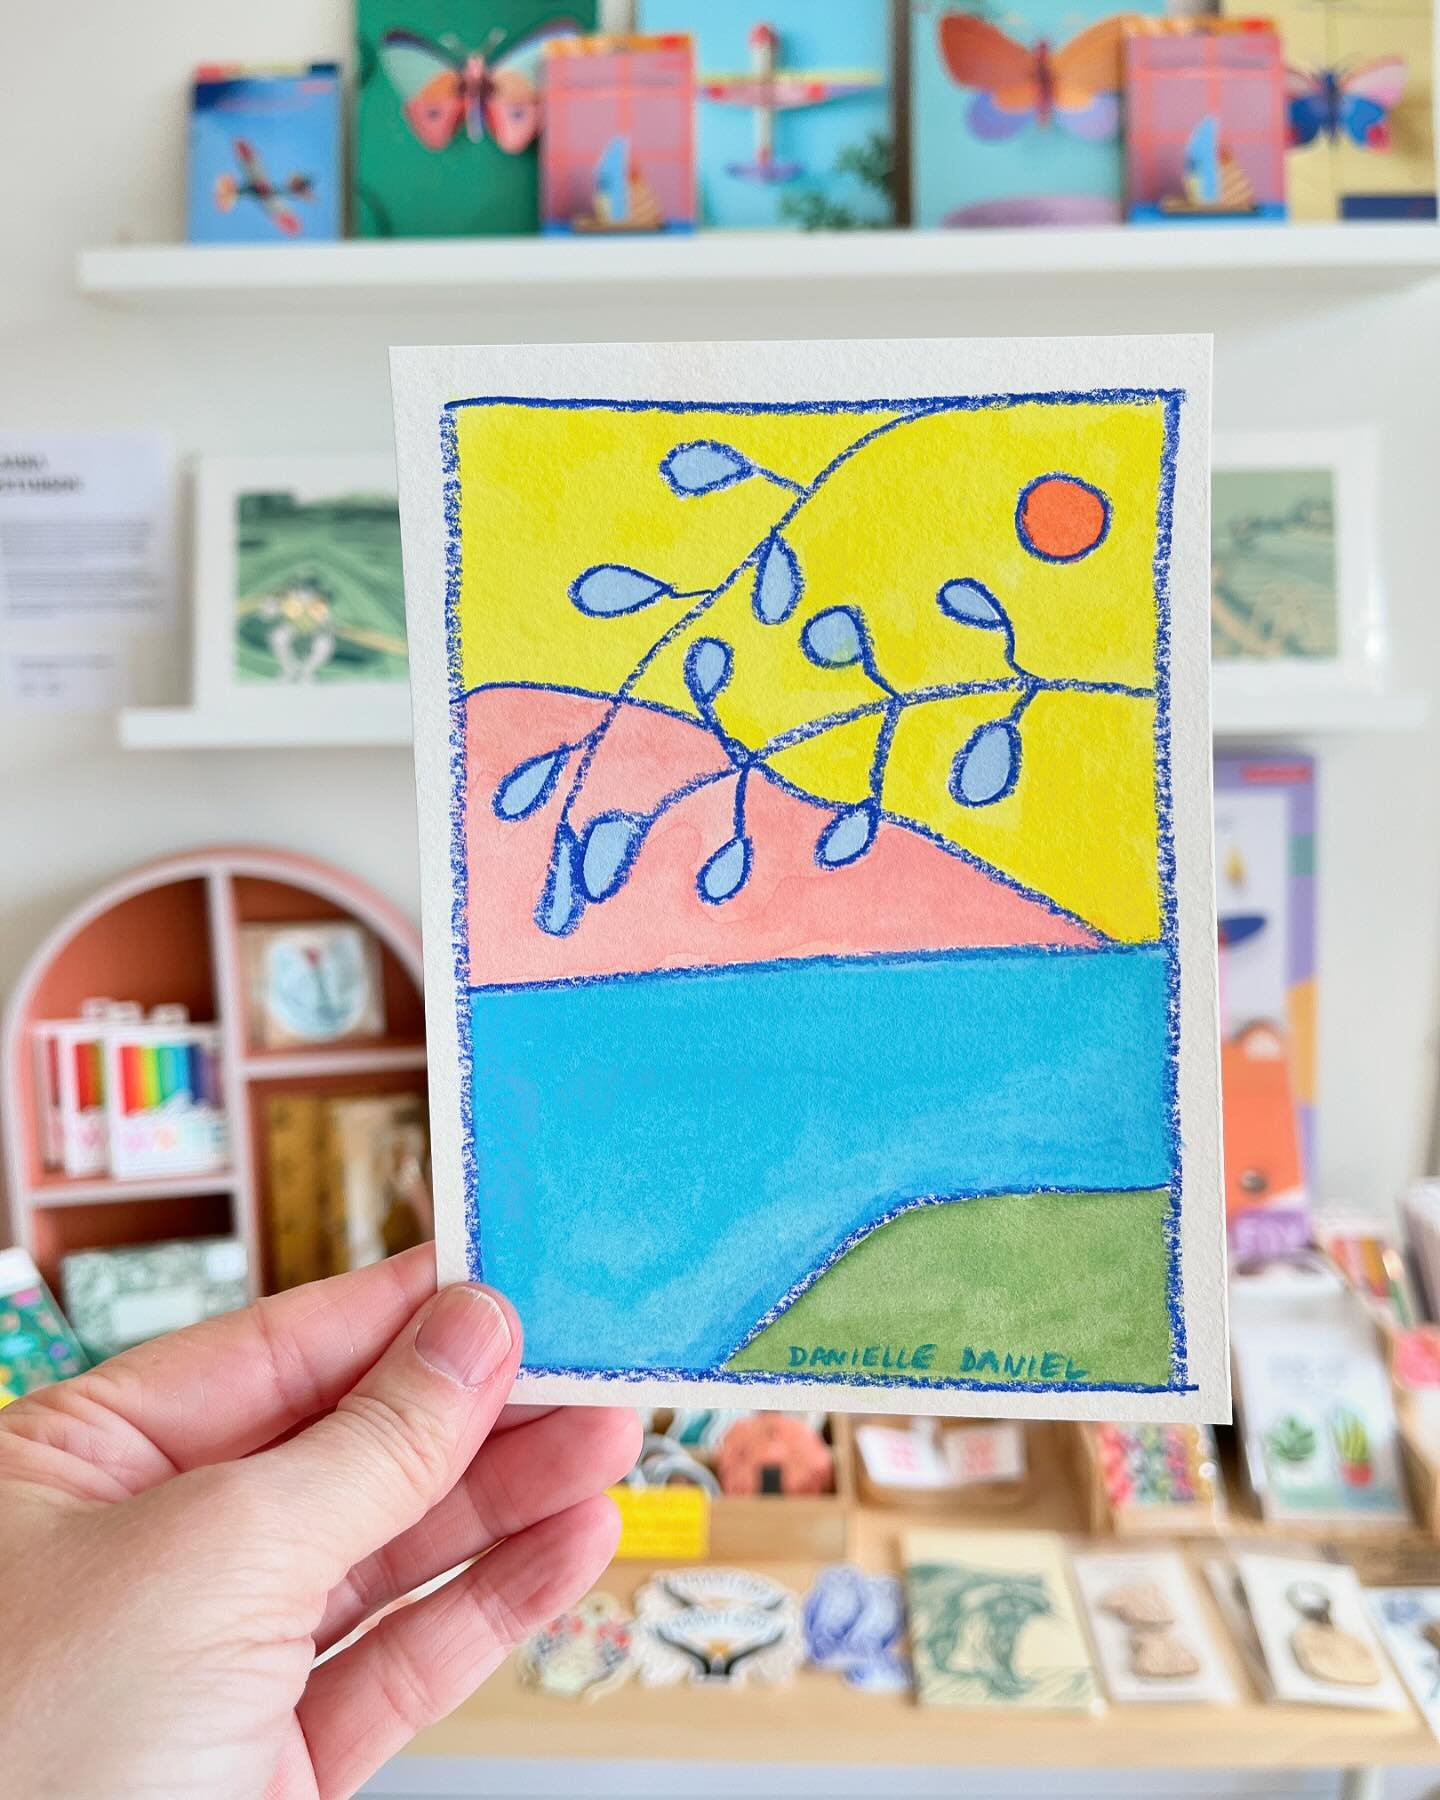 🎨 New paintings inspired by the Manitoulin Island landscape are here! Small works on paper to bring colour and JOY to a small corner of your life. Painted by Danielle Daniel in the early winter mornings while she drank way too much coffee. ☺️ Stop b